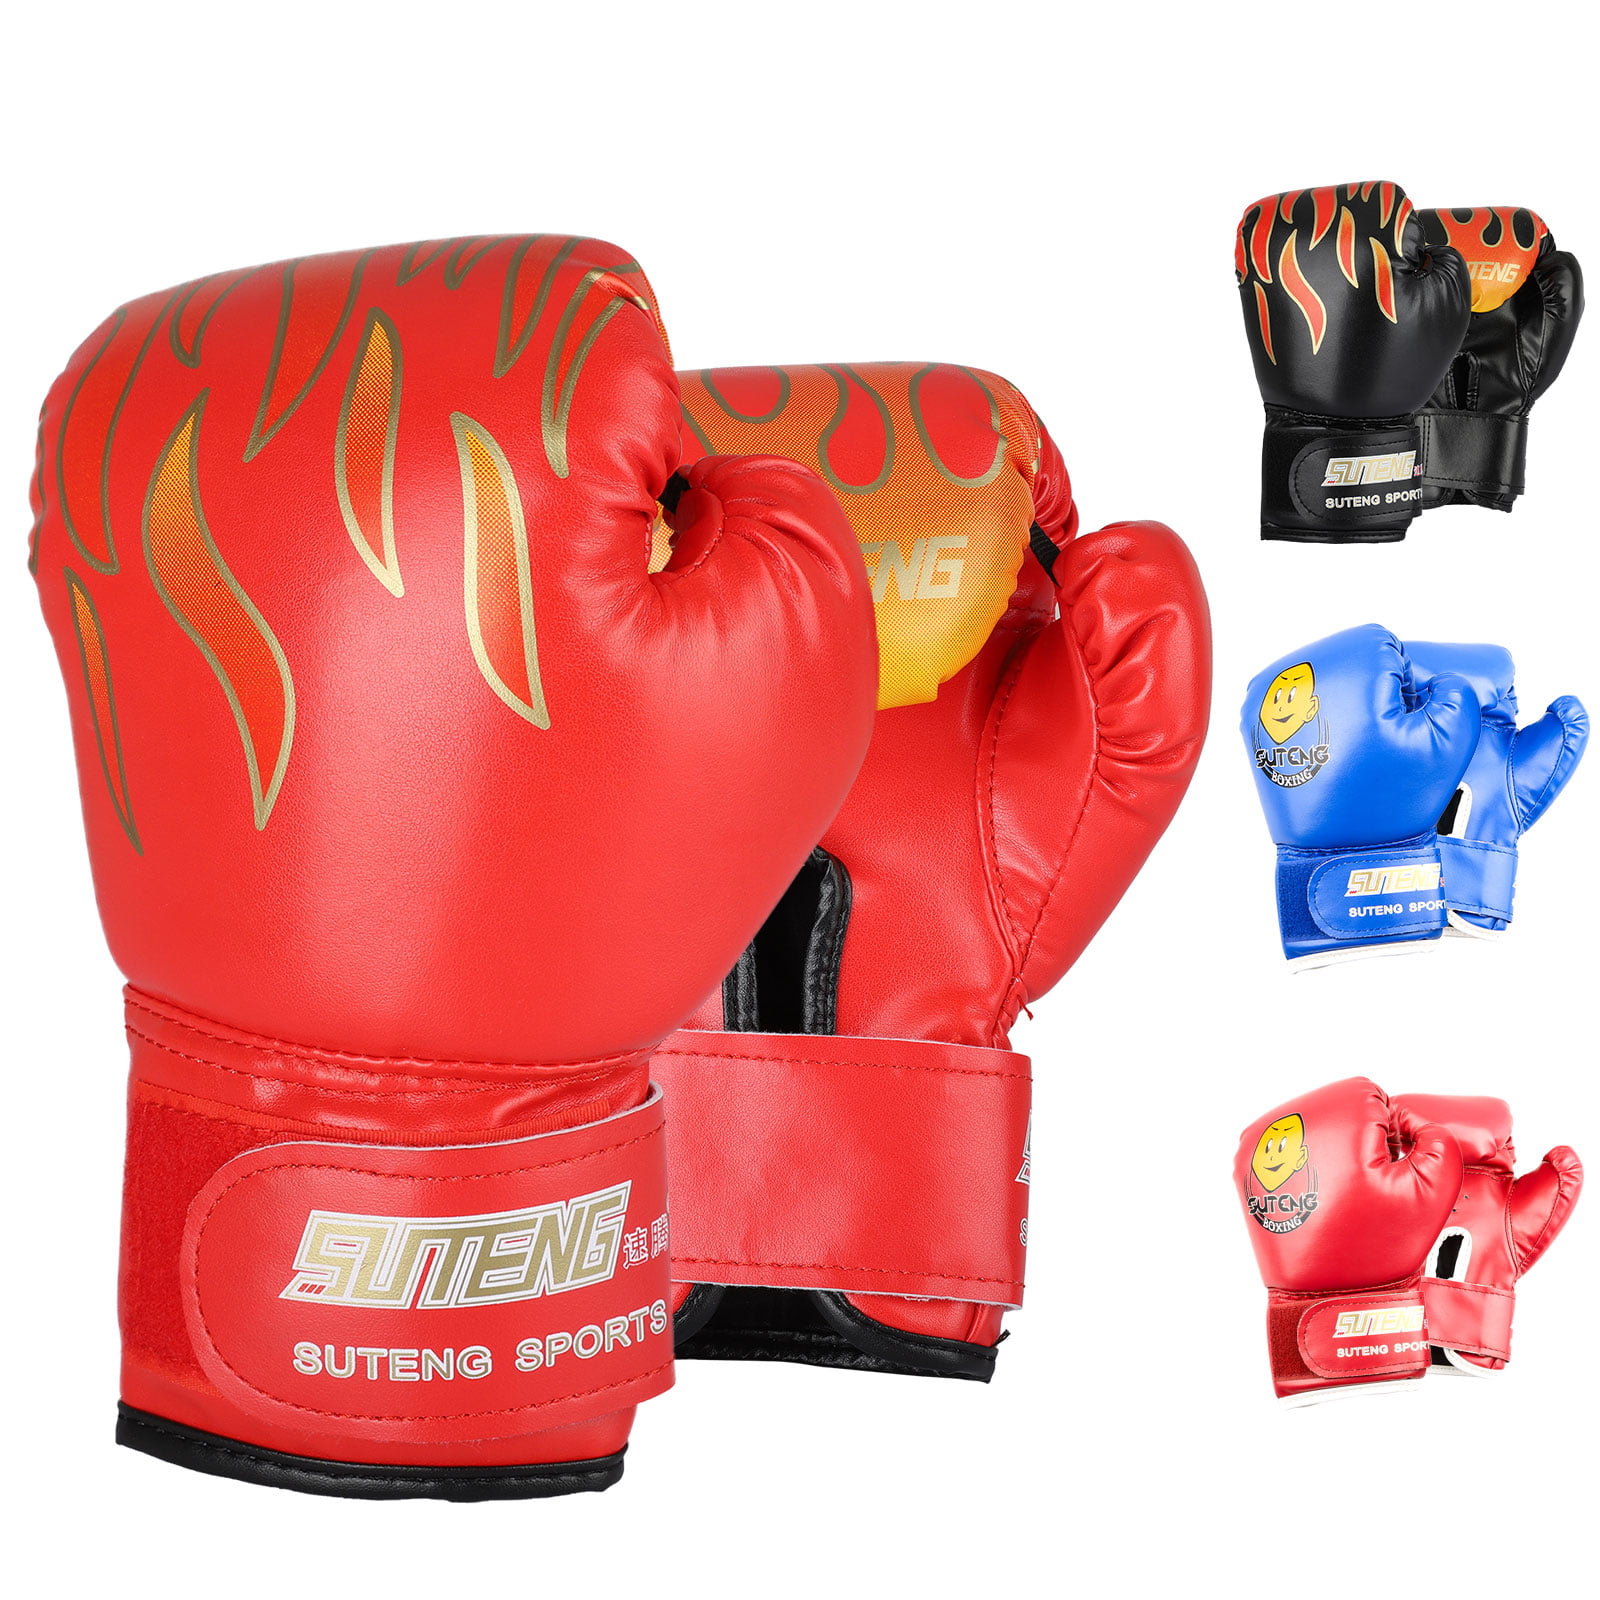 Mma Fight Gloves Boxing Muay Thai glove Ufc Rdx Leather Punch Cage box pads 